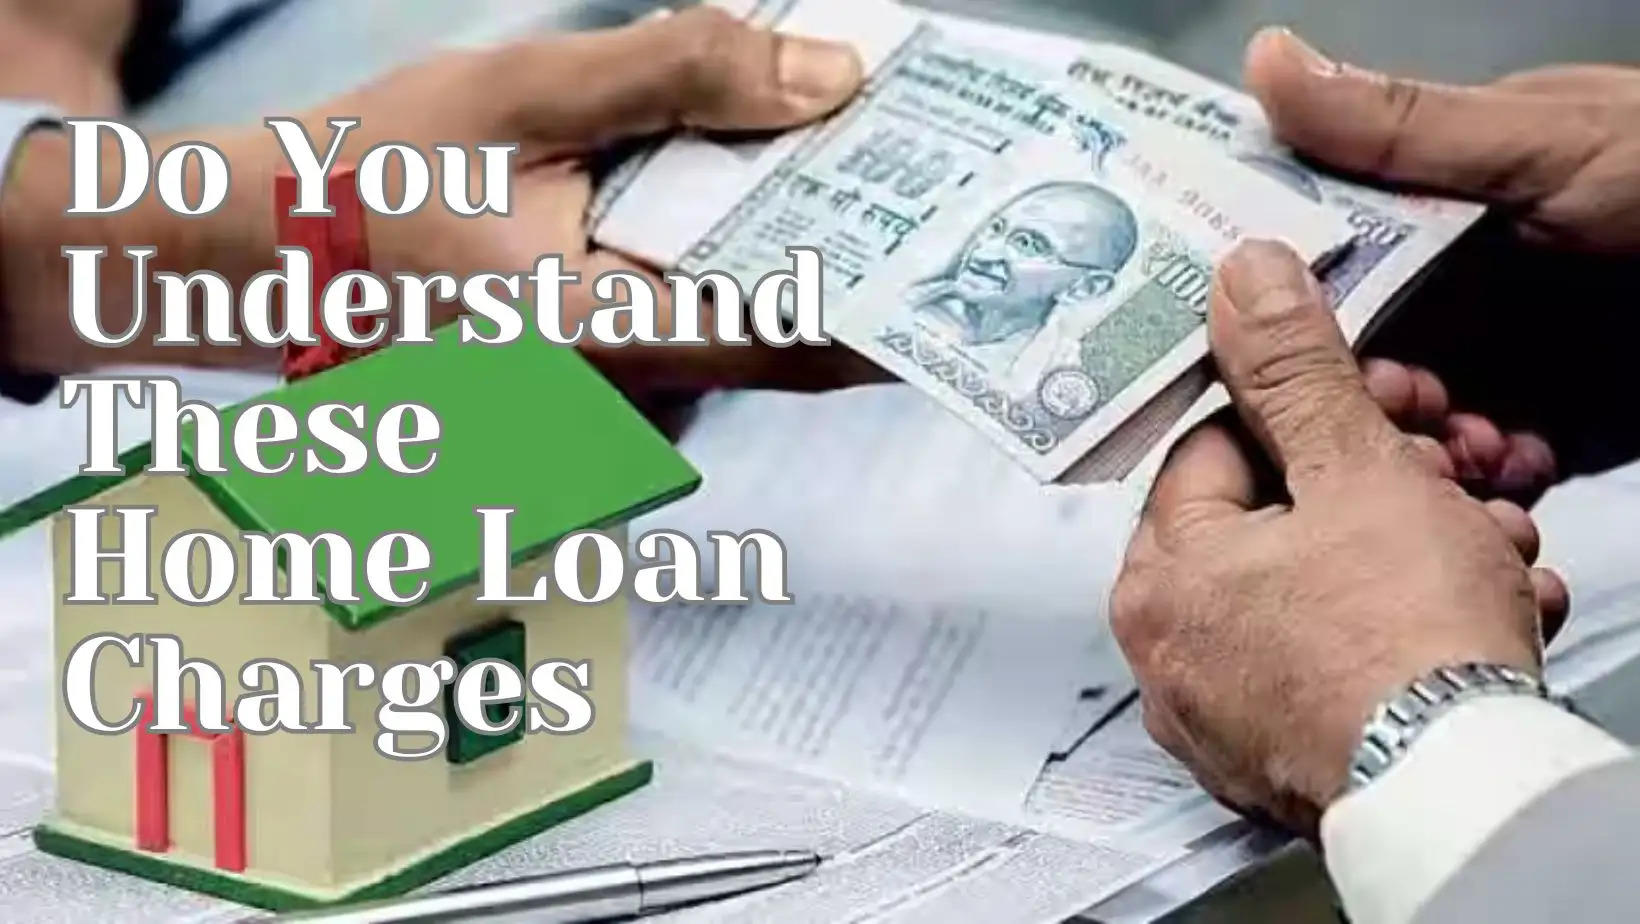 Home Loan Charges What you should know